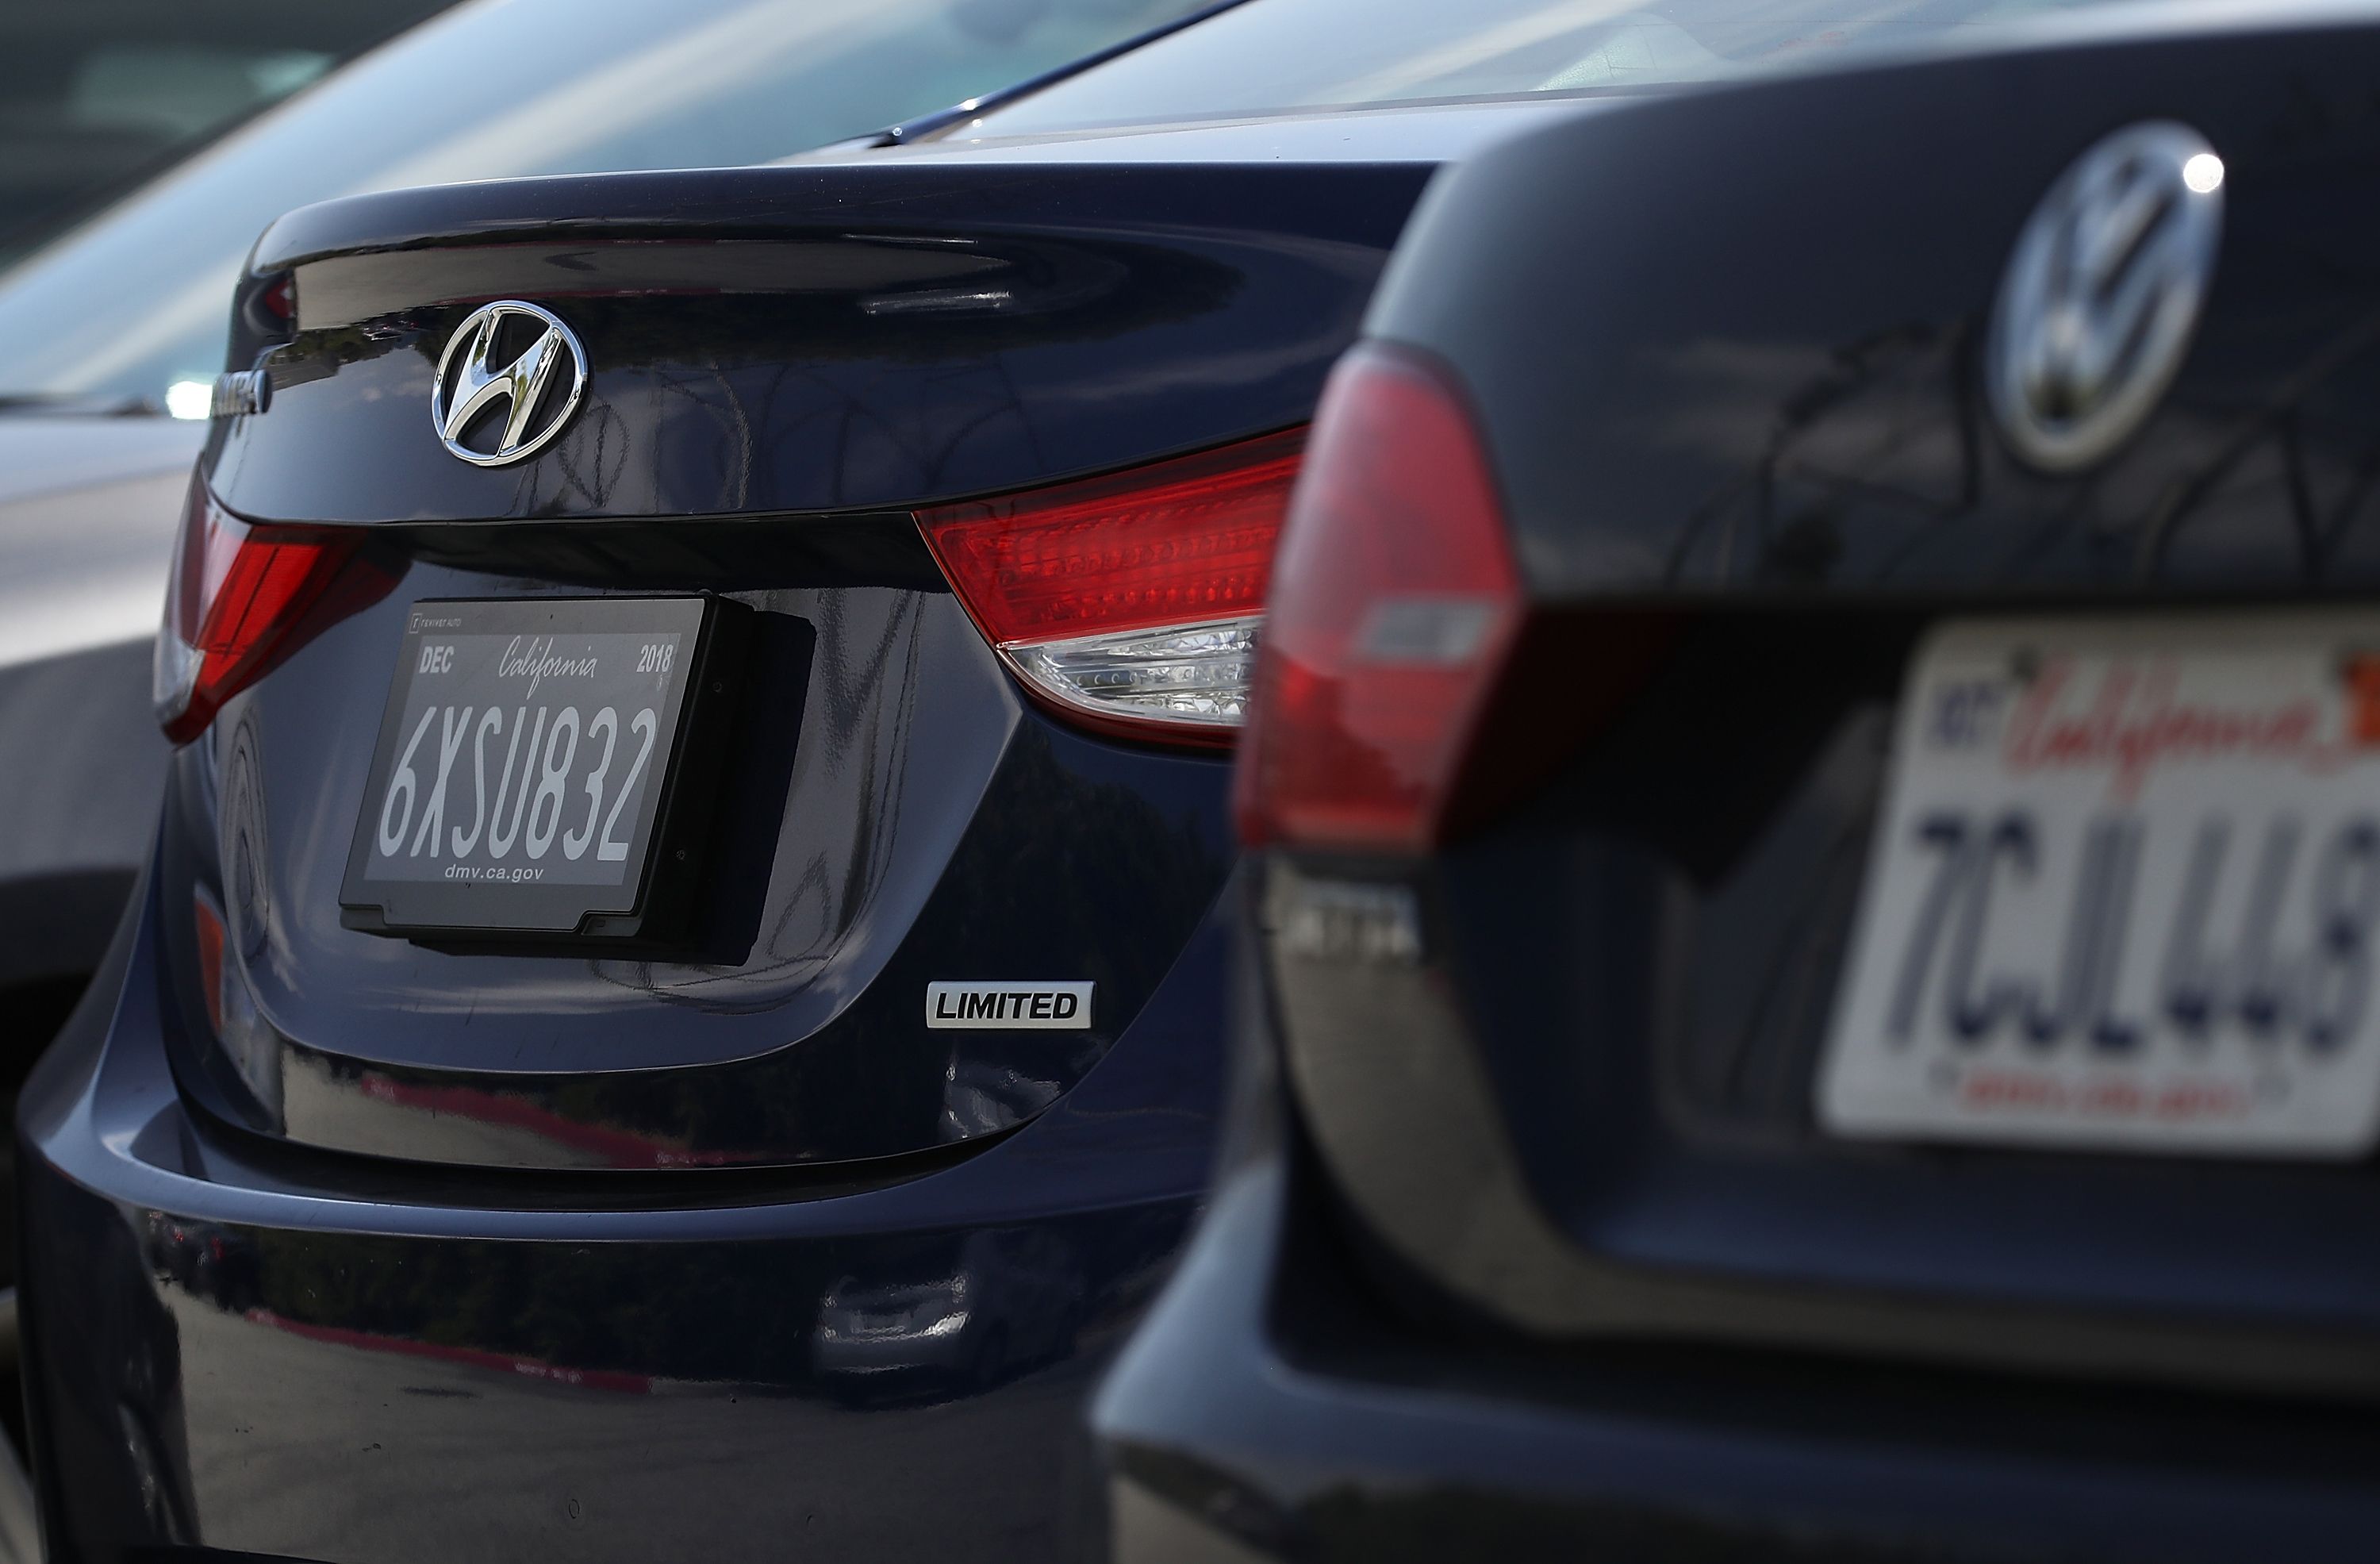 Hackers Gained Access to California's Digital License Plates